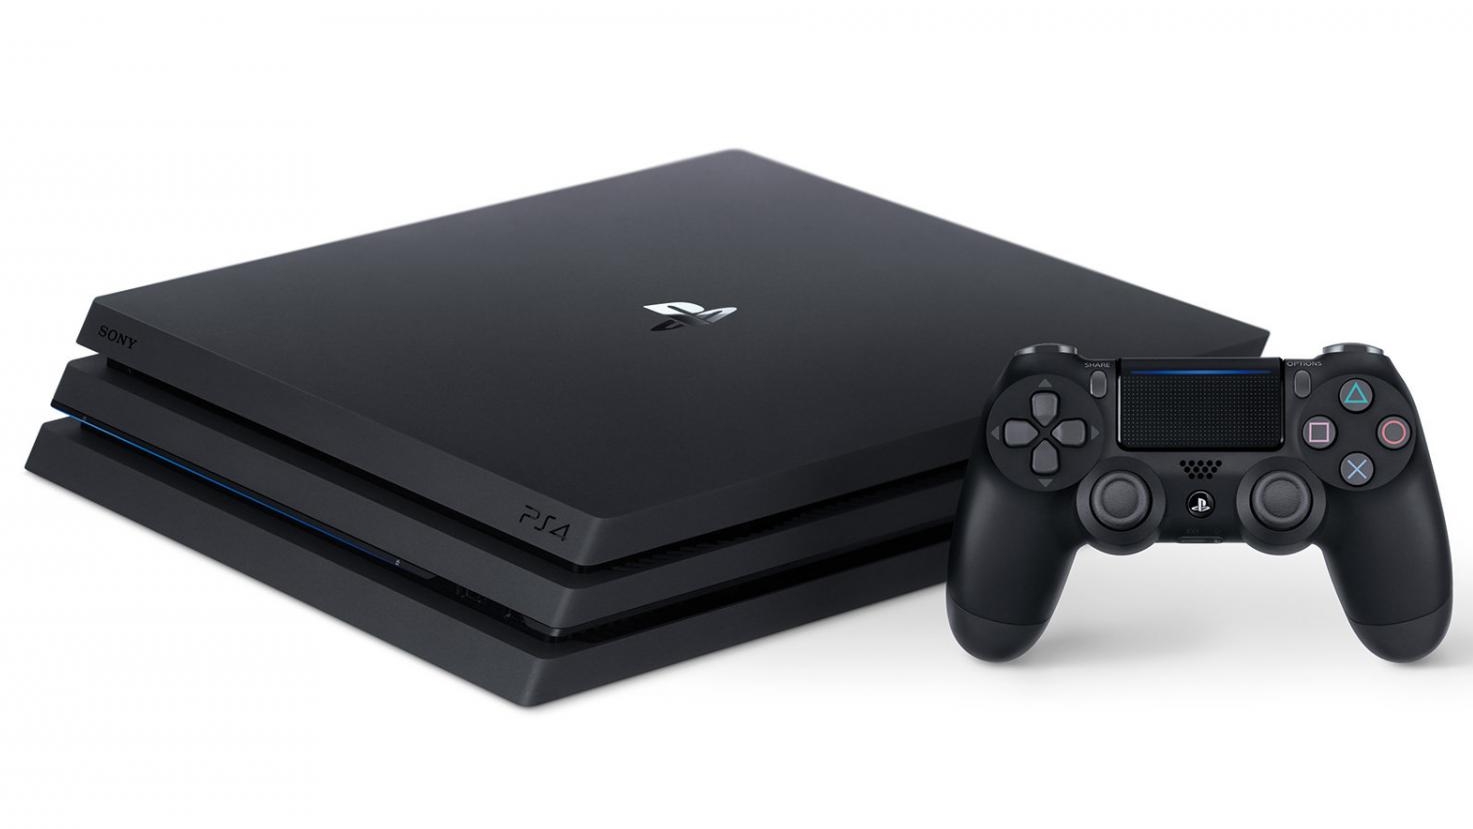 afterpay ps4 pro